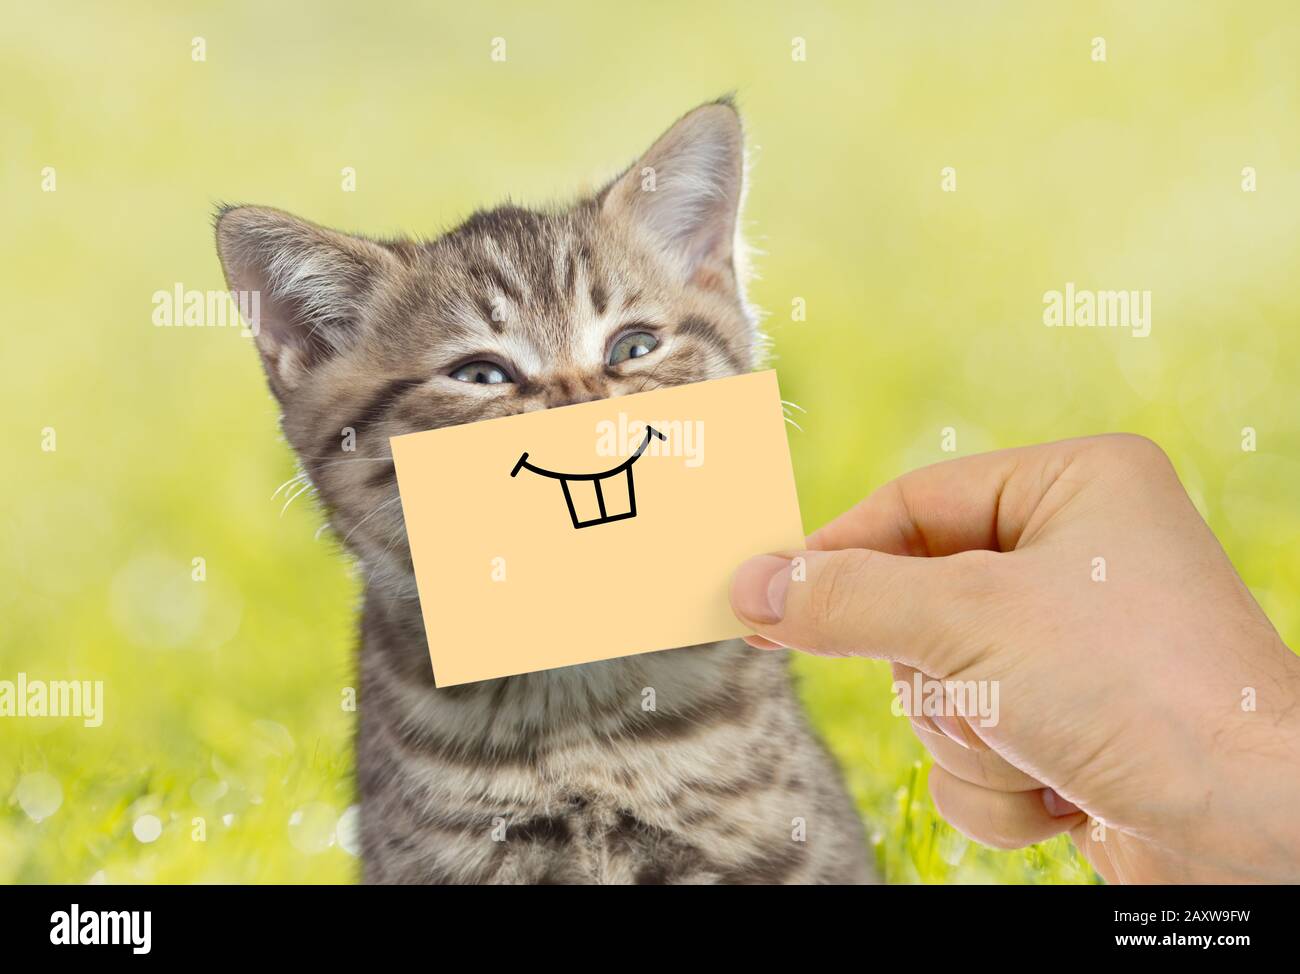 Funny cat portrait with smile on green grass outdoor Stock Photo